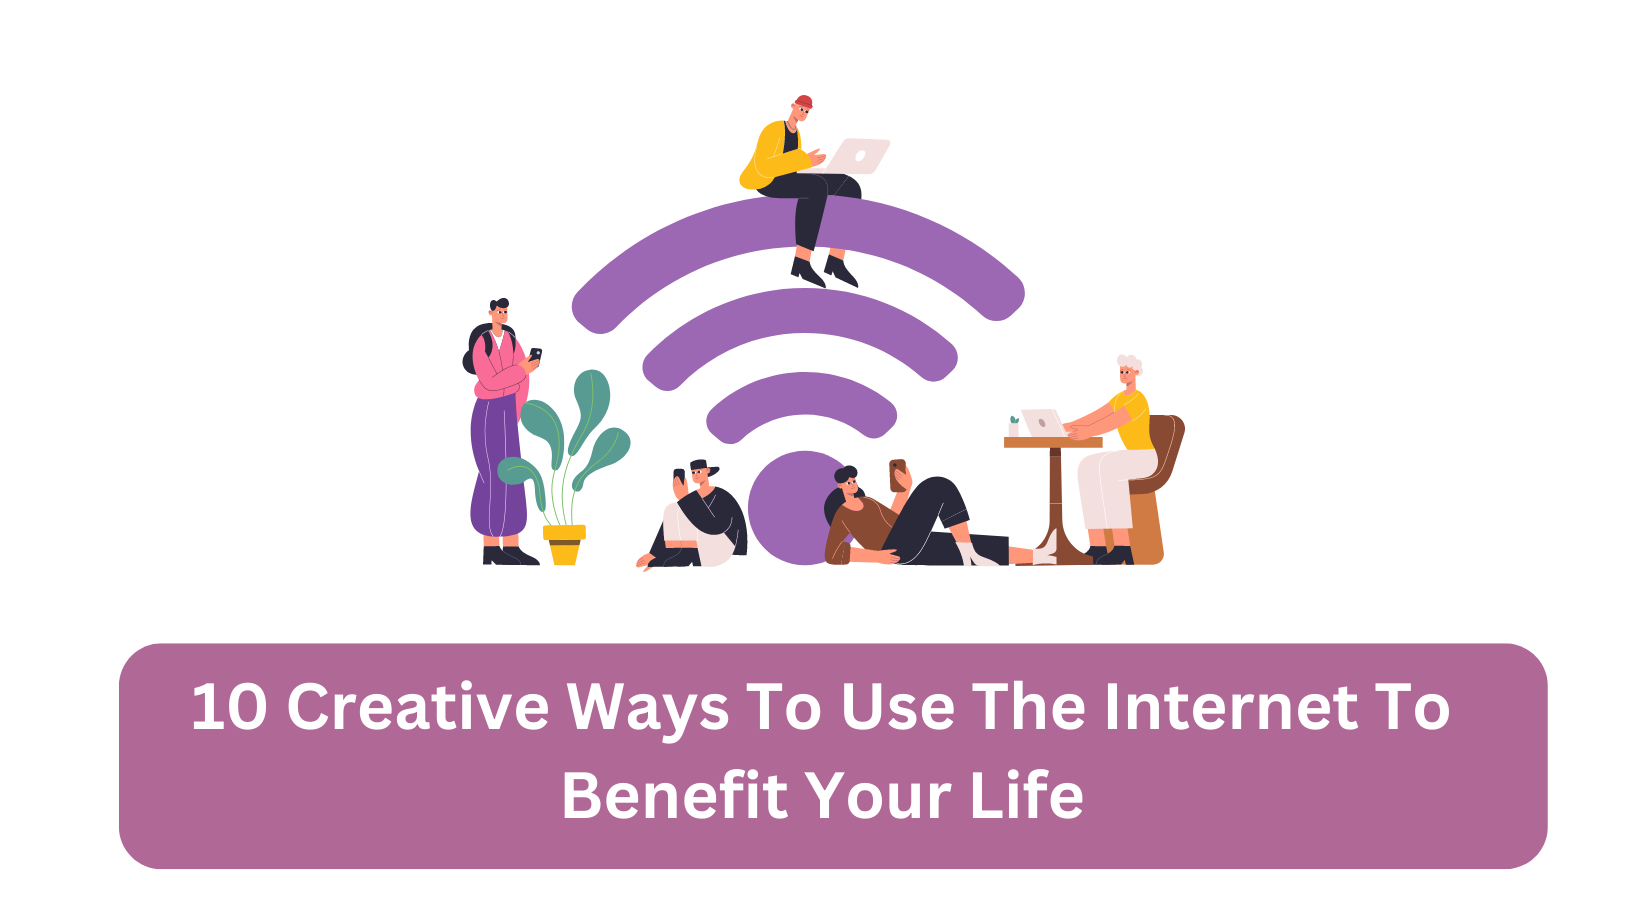 10 Creative Ways To Use The Internet To Benefit Your Life